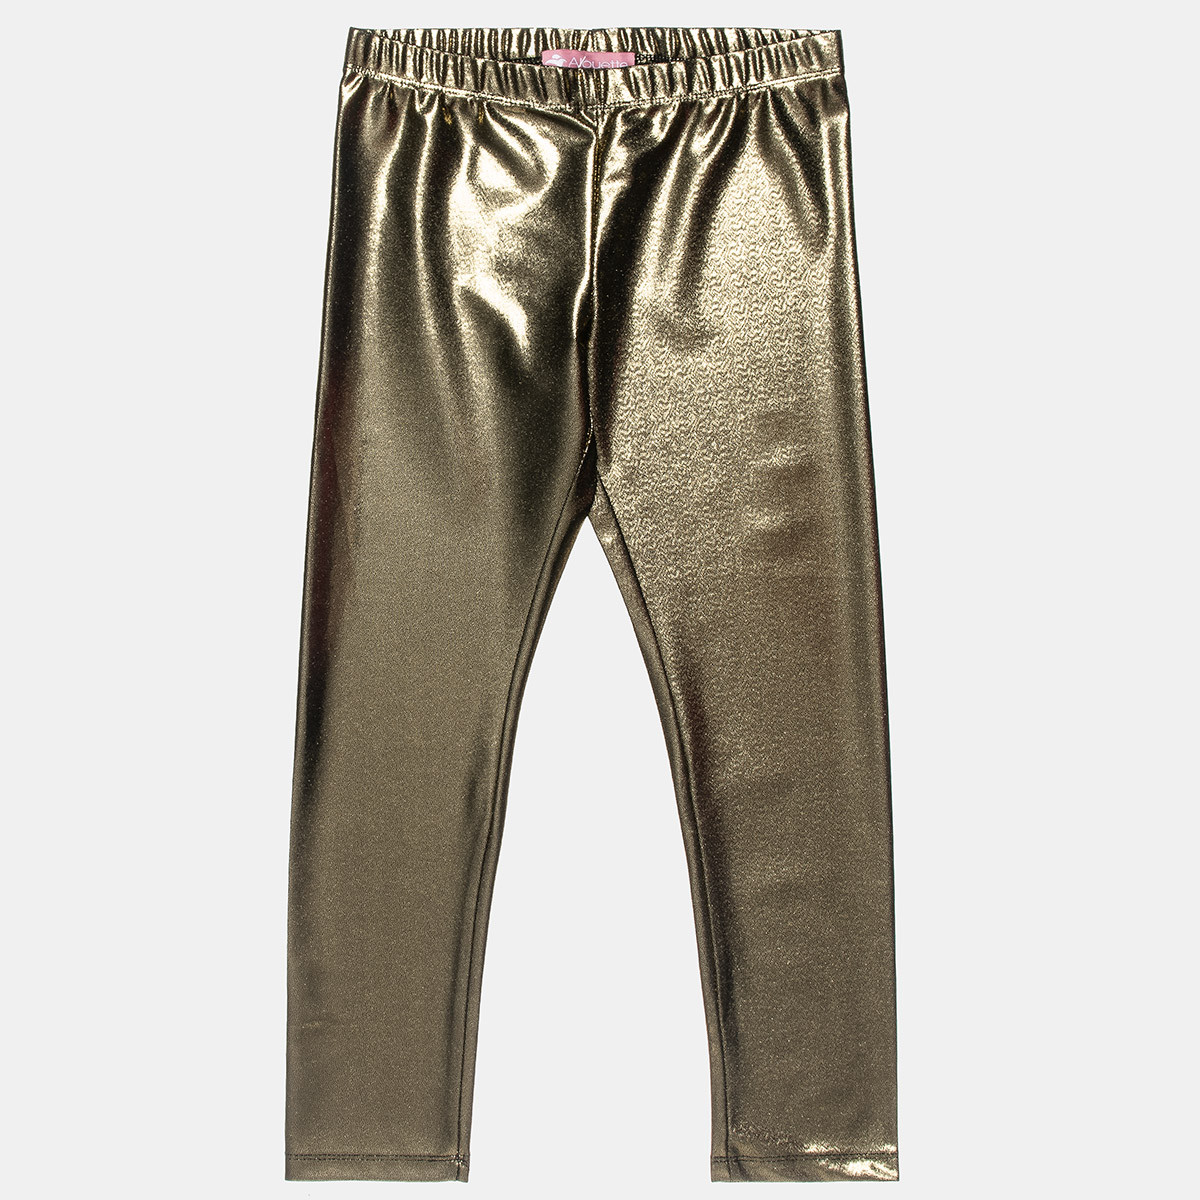 Leggings shiny gold with glitter effect (18 months-5 years